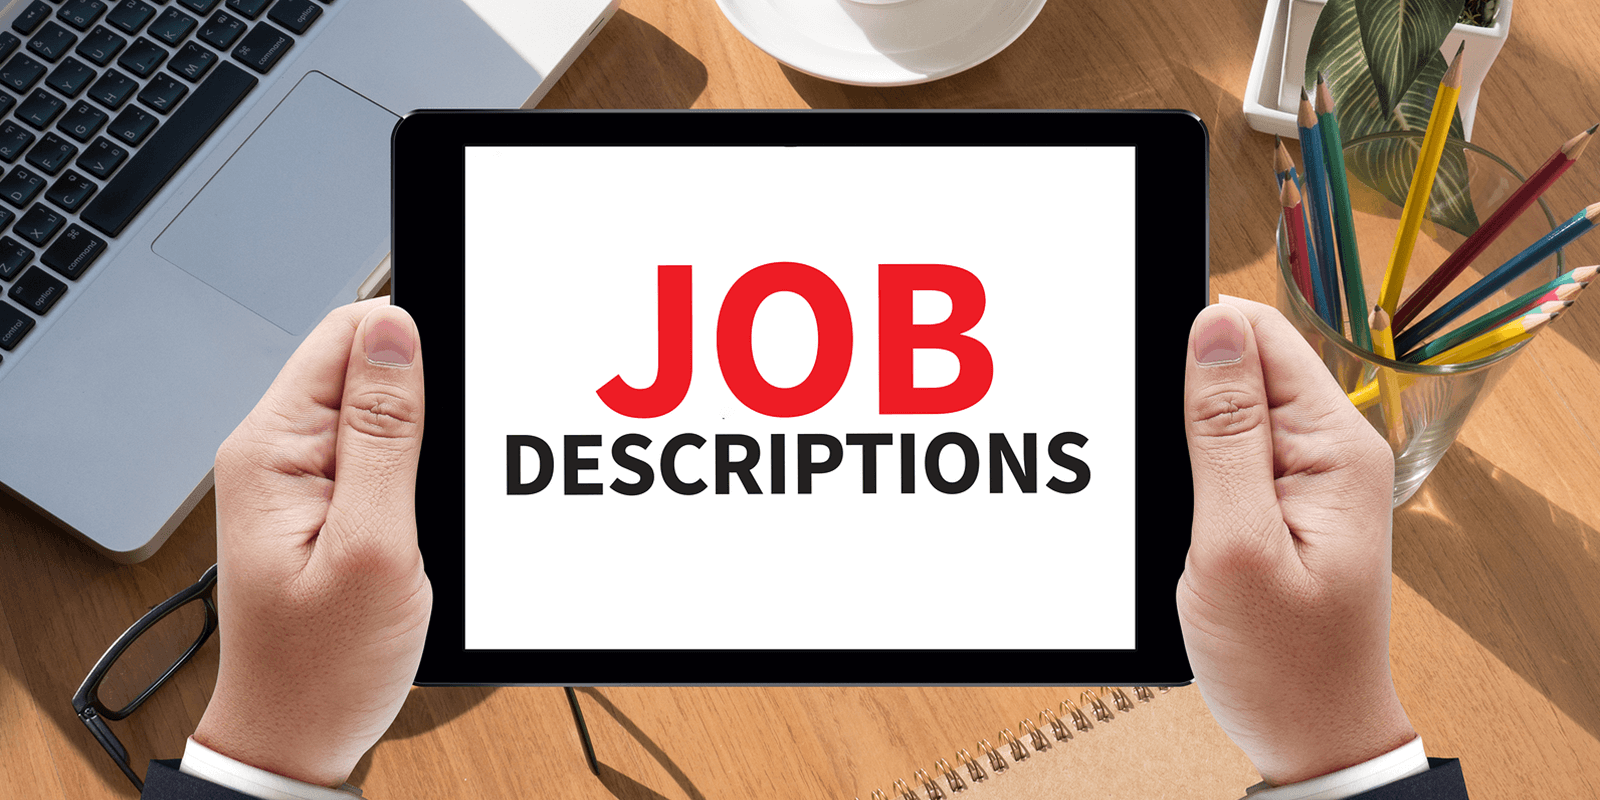 Are You Making These 6 Mistakes When Writing Job Descriptions